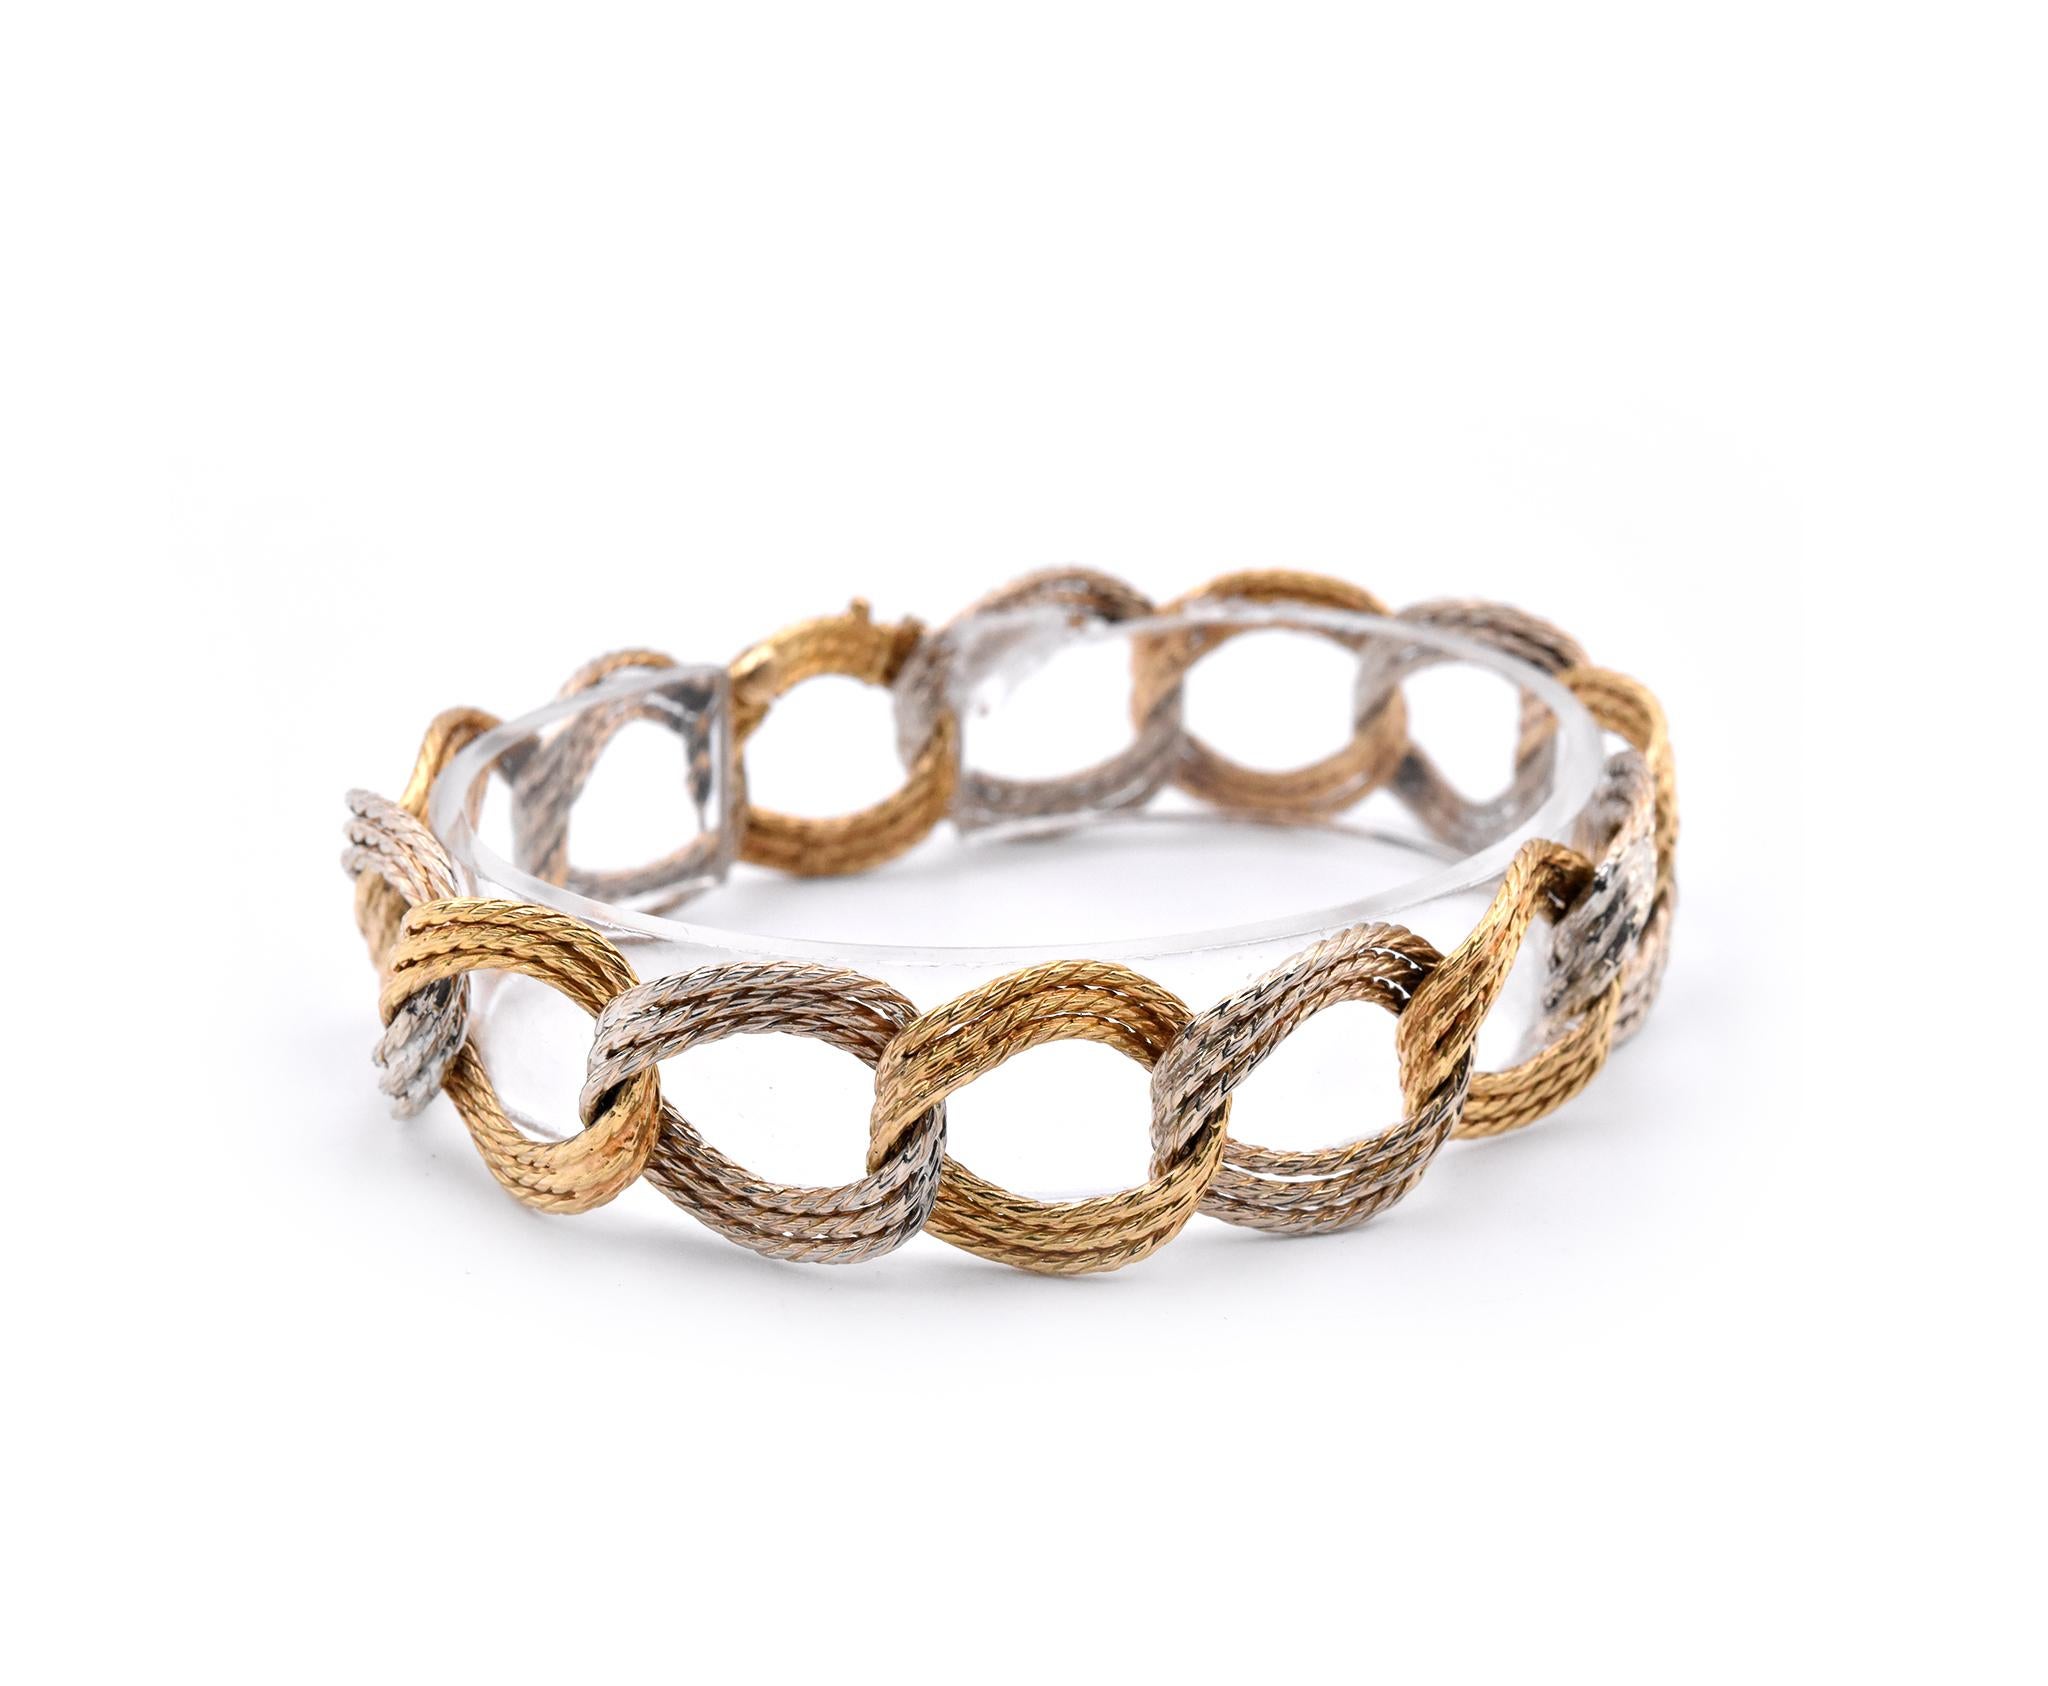 Designer: custom
Material: 18k yellow and white gold
Dimensions: bracelet measures 7.75-inches in length and 16.3mm in width
Weight: 32.2 grams
